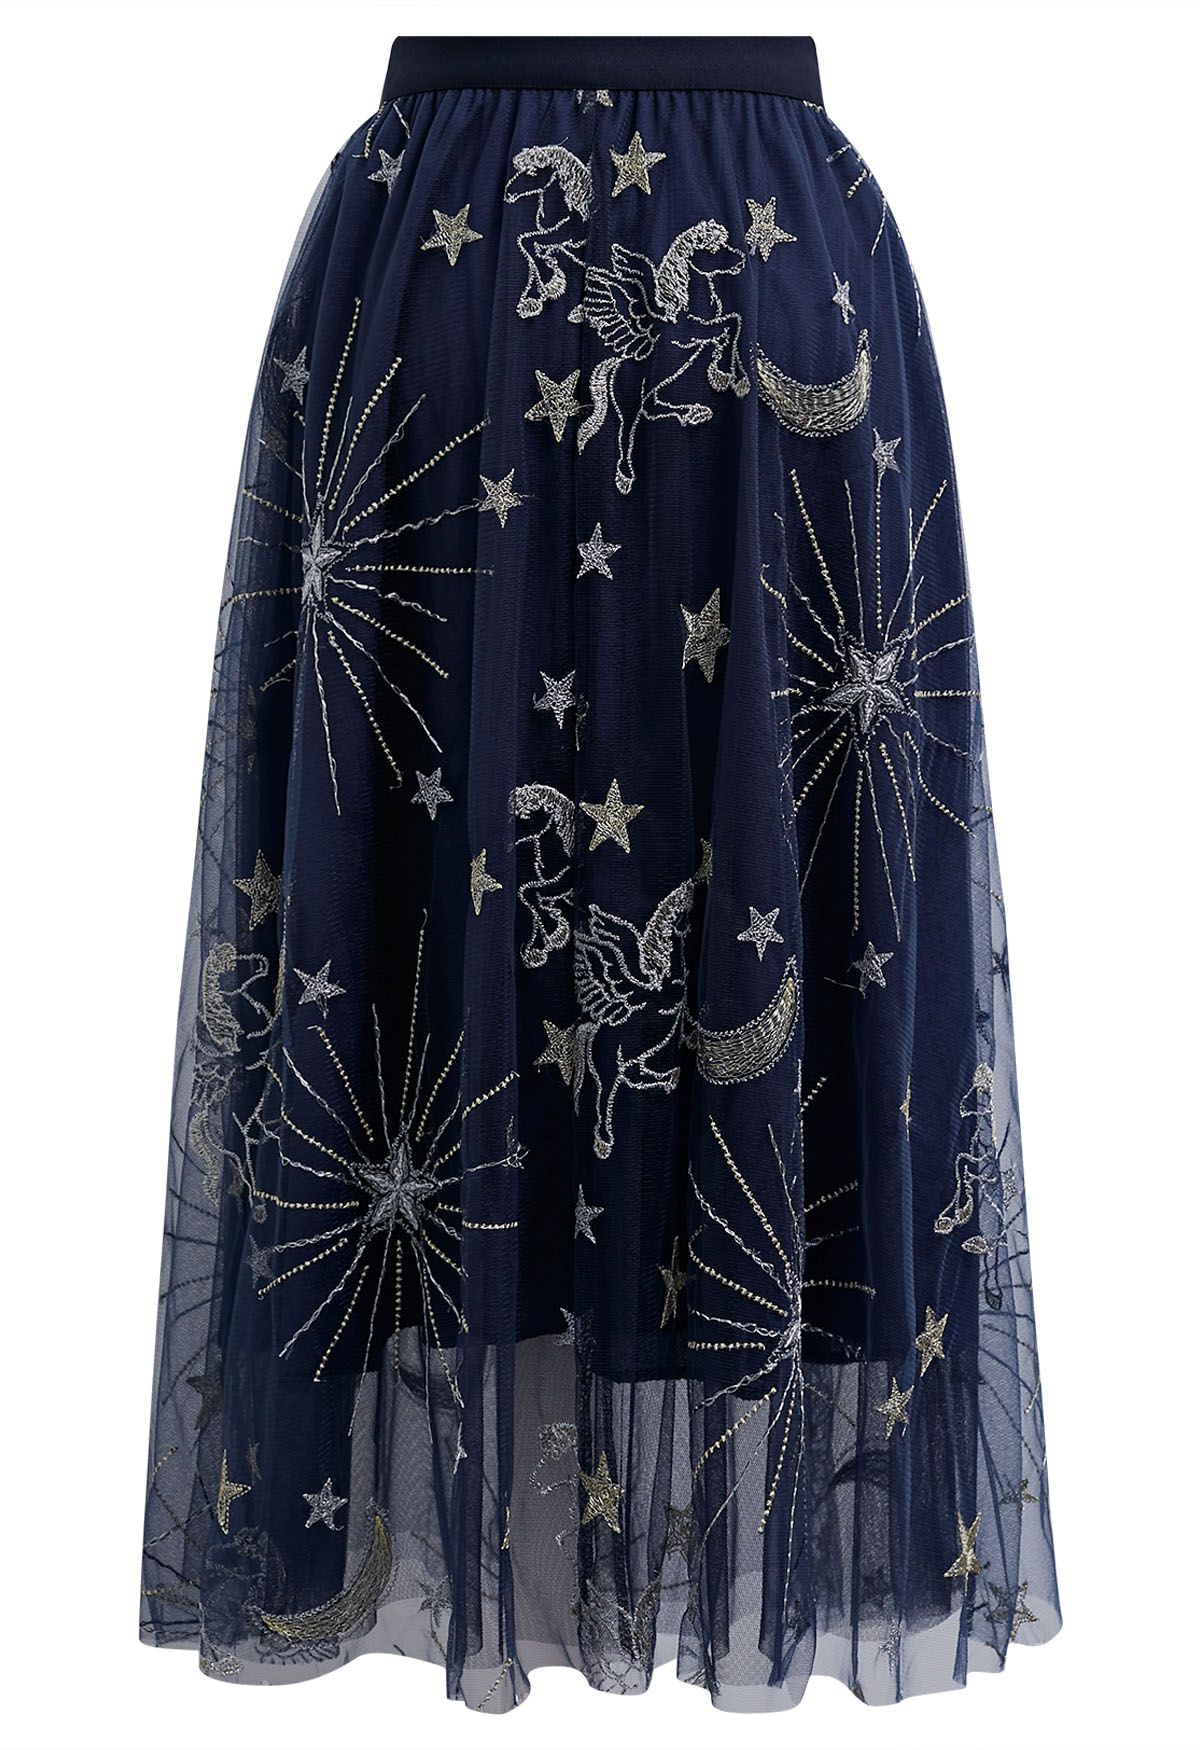 Mysterious Night Moon and Star Embroidered Mesh Tulle Skirt in Navy